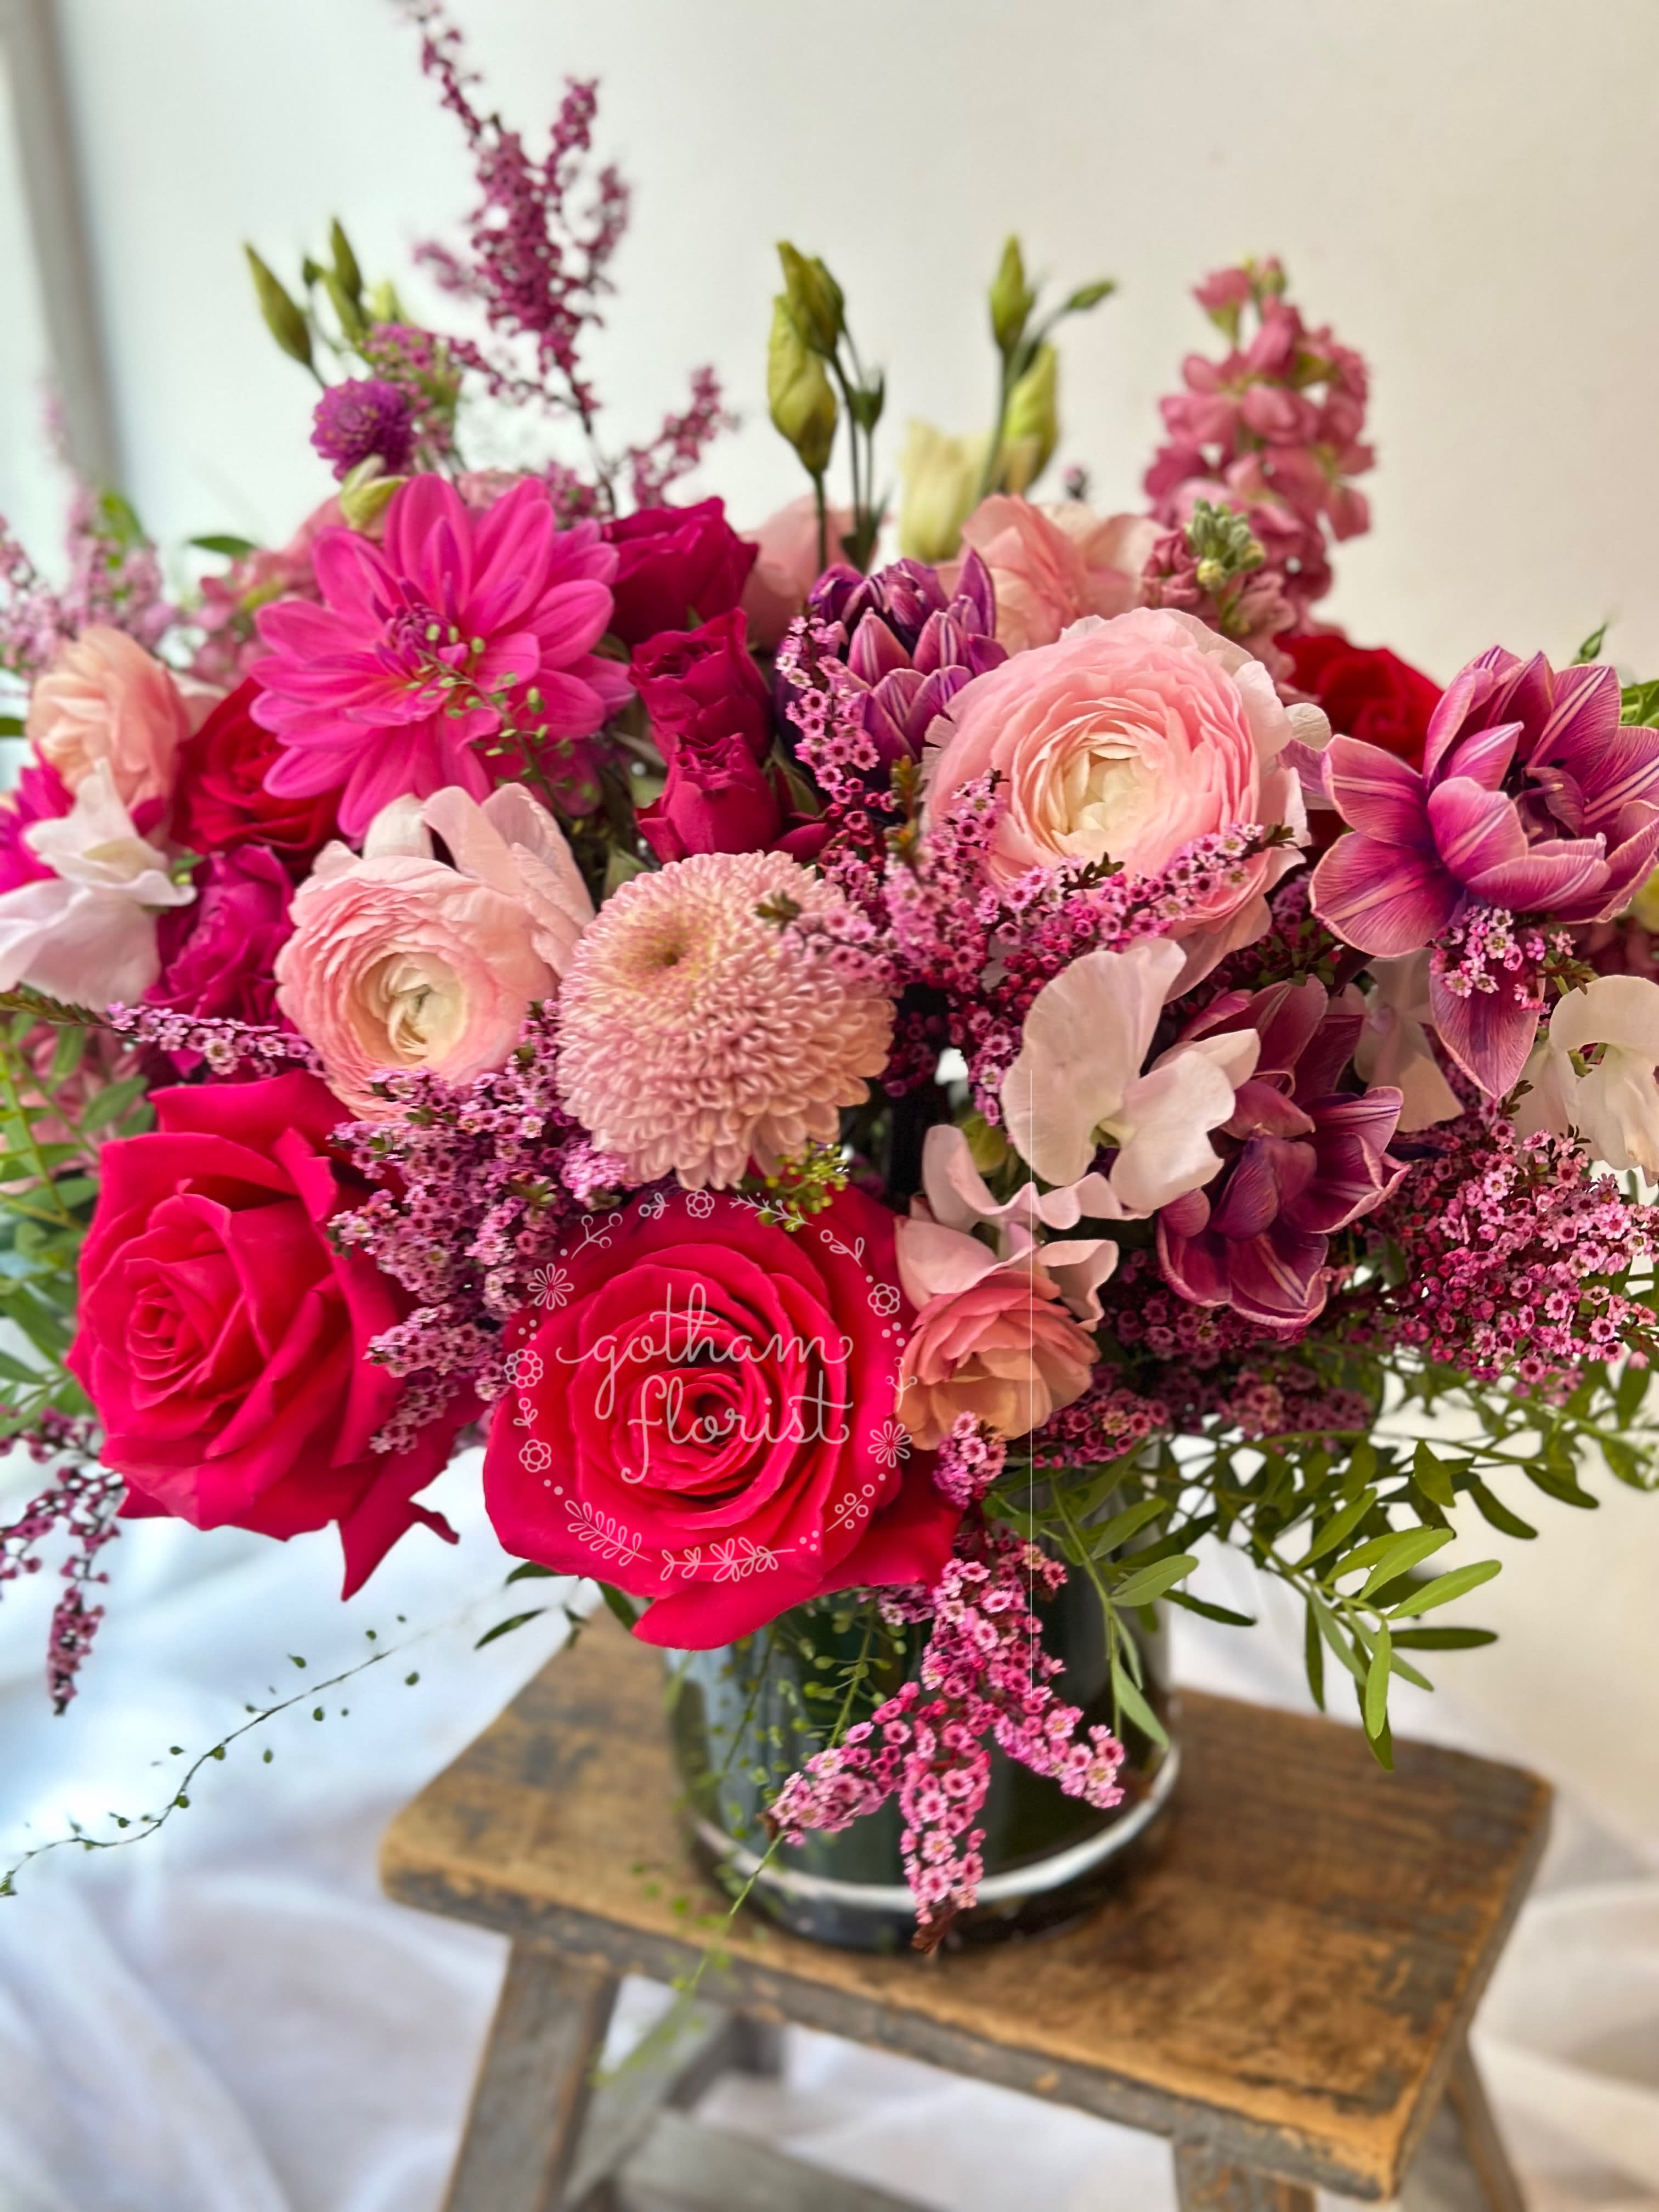 Hypnotic - Pink and hot pink flowers. A beautiful pop of color for that special someone who loves flowers. Send the coolest flowers from the best flower shop in new york.